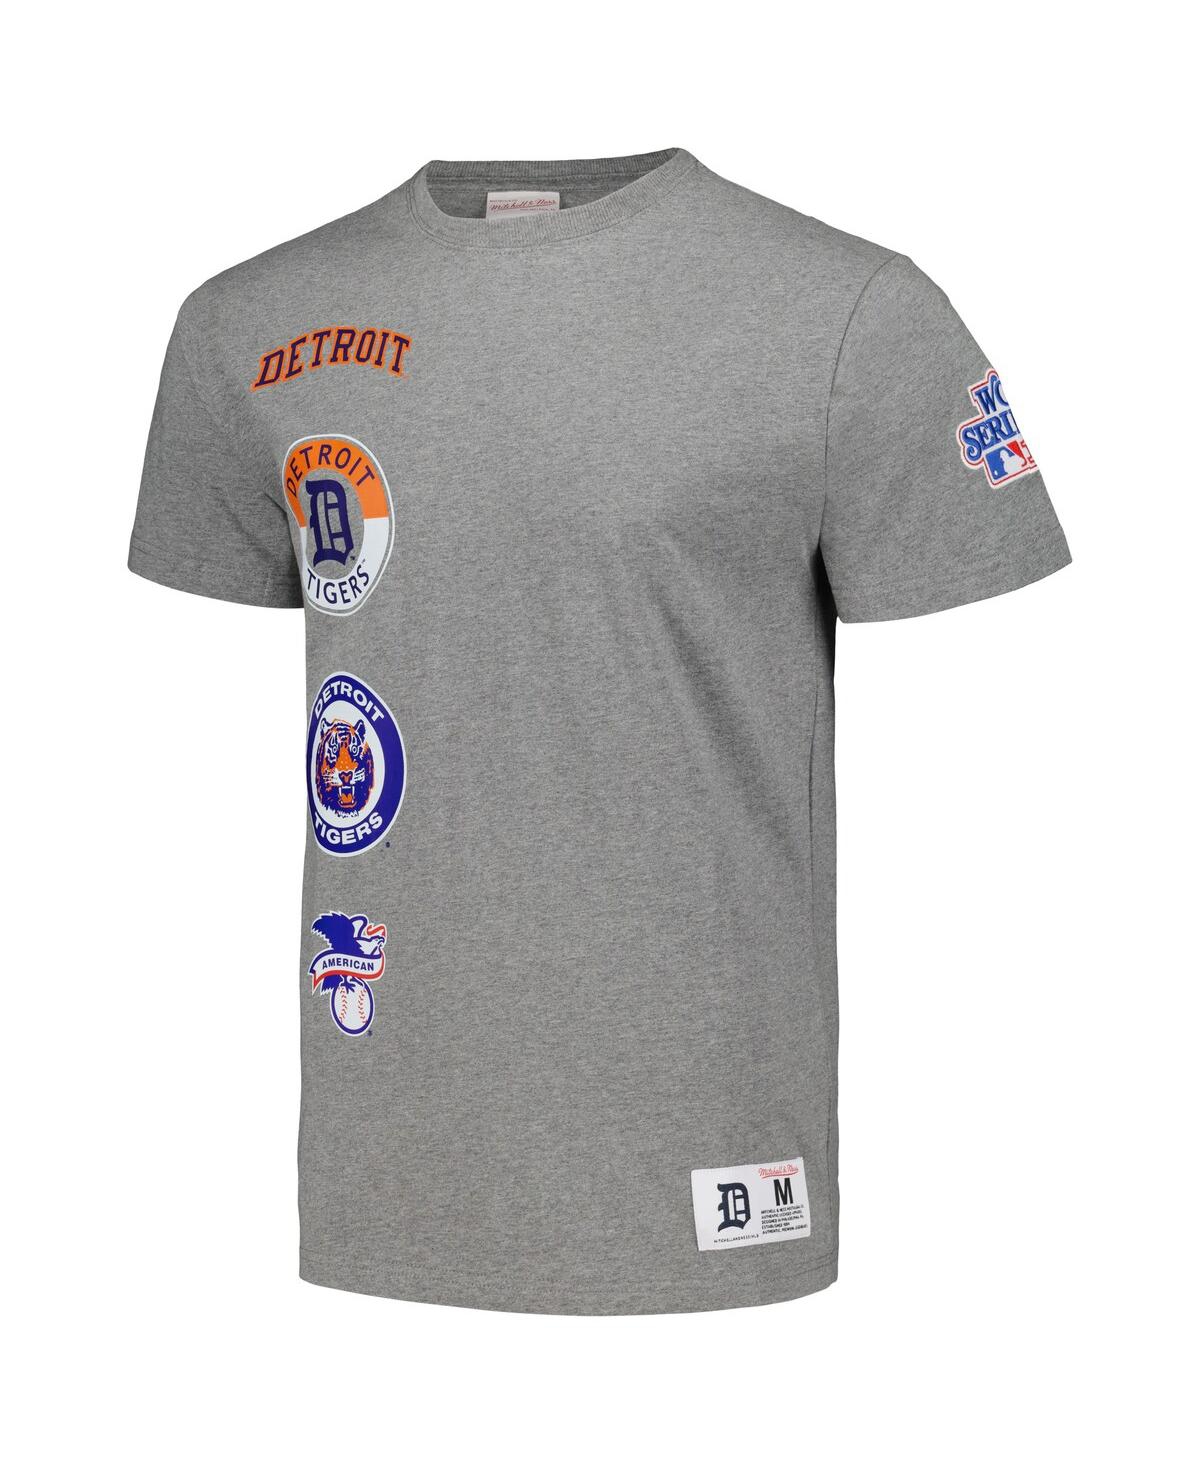 Men's Mitchell & Ness Heather Gray Detroit Tigers Cooperstown Collection City Collection T-Shirt